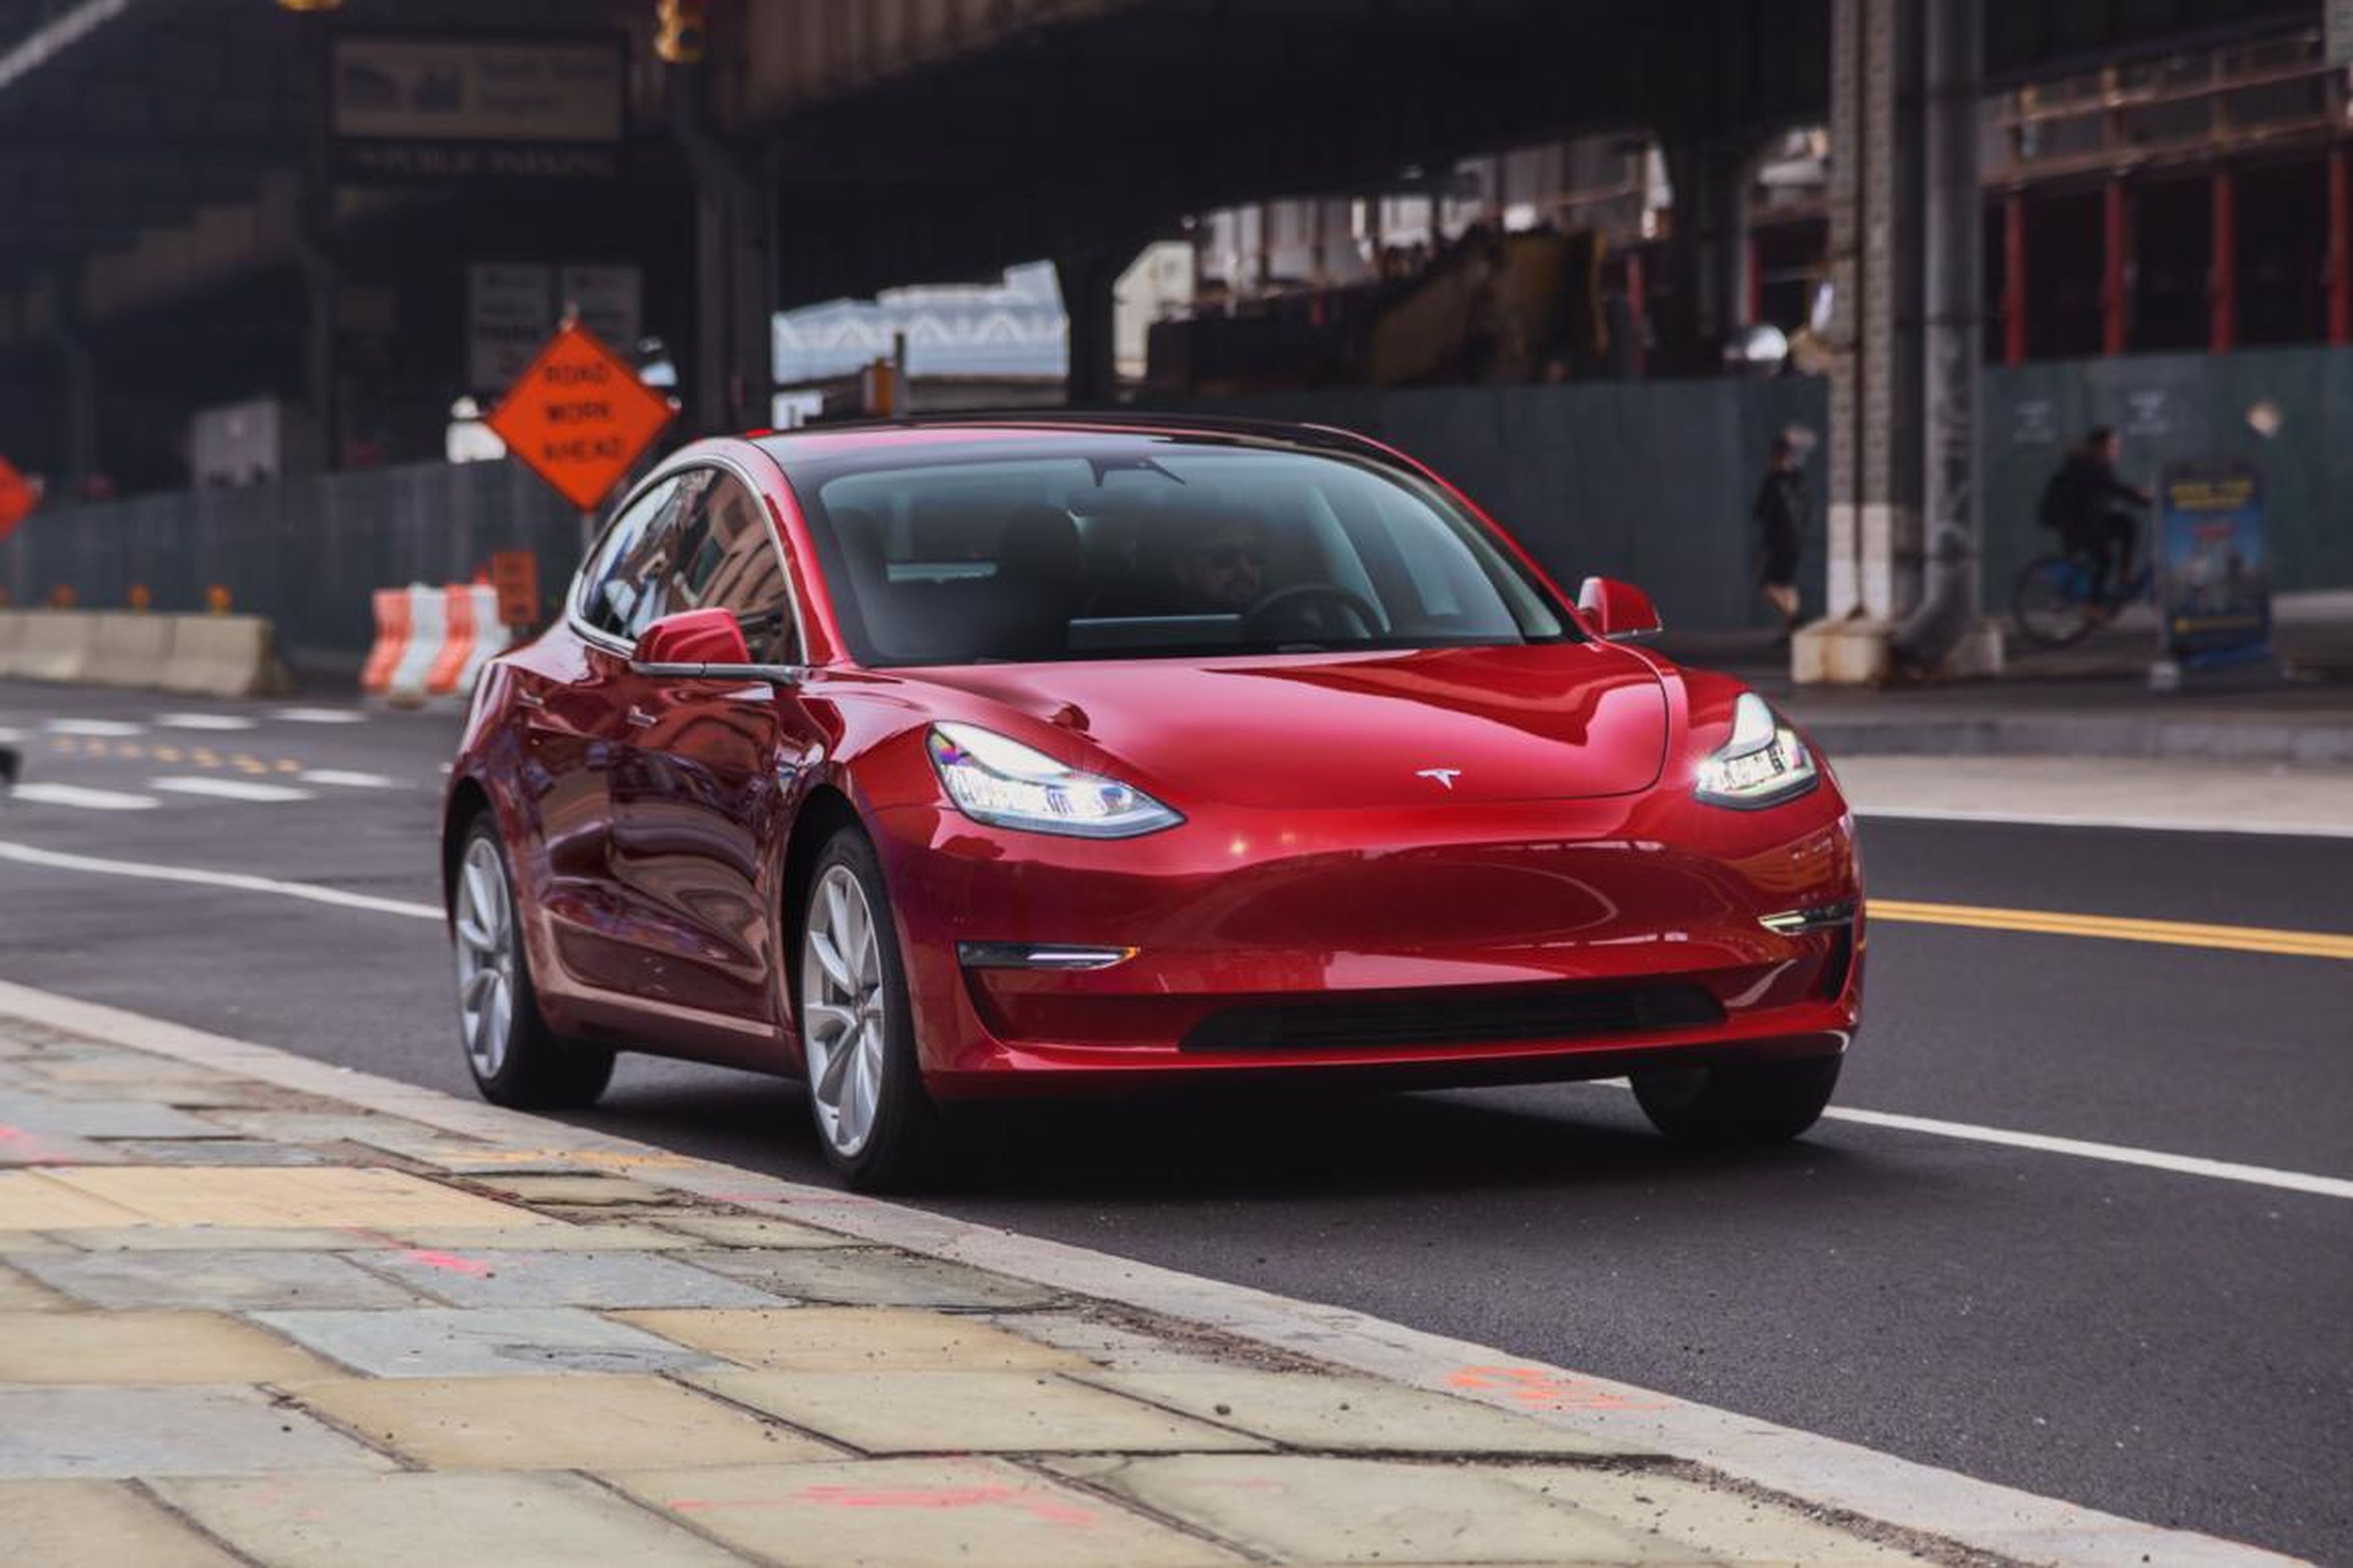 1. The standard Model 3 features a single motor. The Model 3 Performance features a dual-motor system to make acceleration feel even zippier.